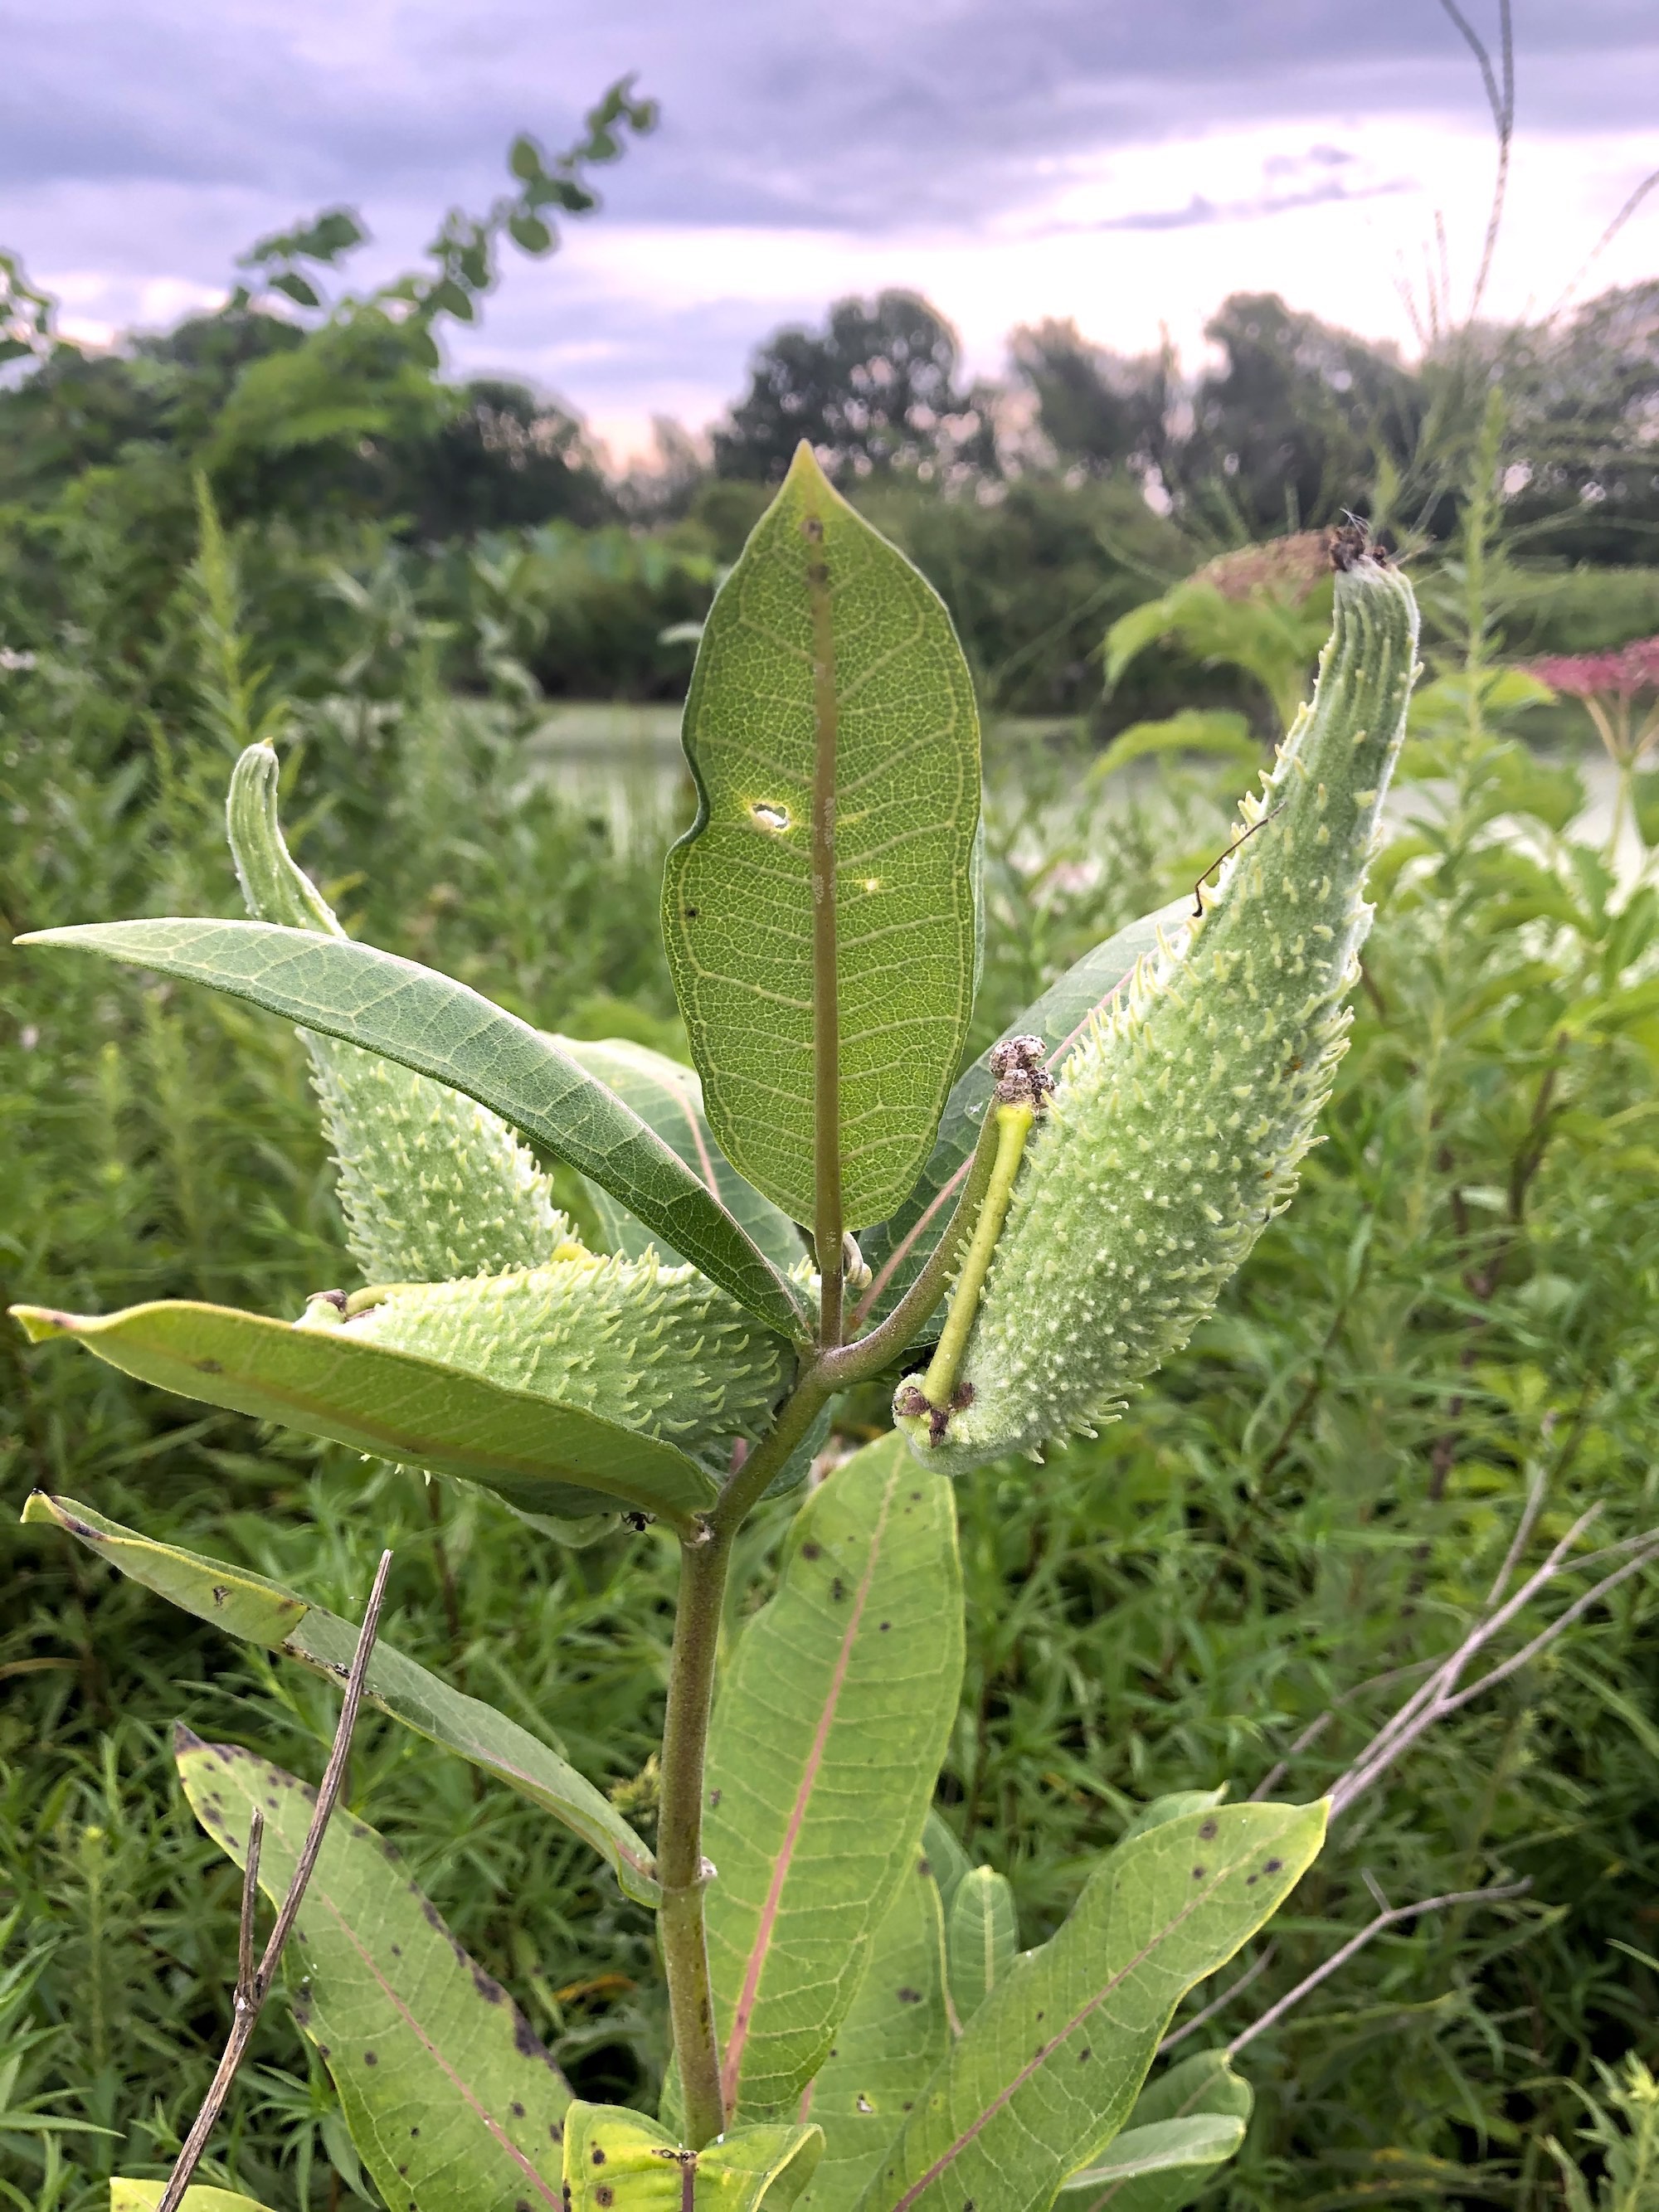 Common Milkweed on shore of Marion Dunn Pond on August 8, 2020.